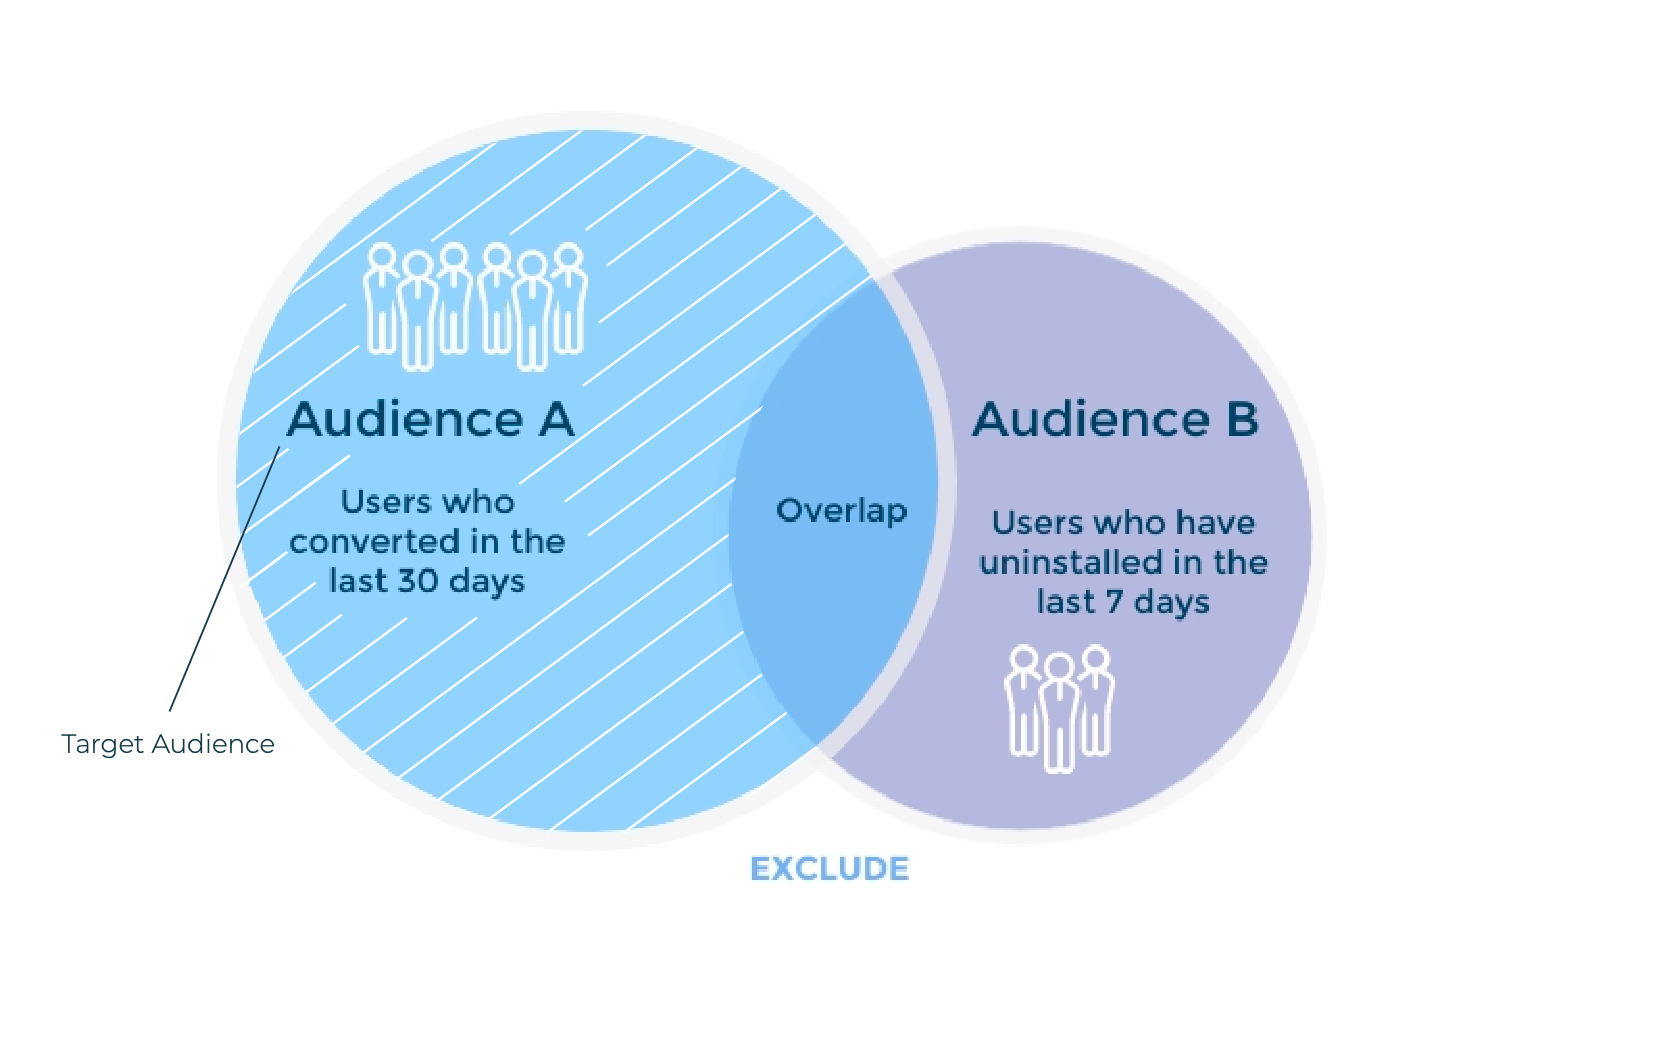 Example of audience segmentation in AppsFlyer (Audience A, exclude B)